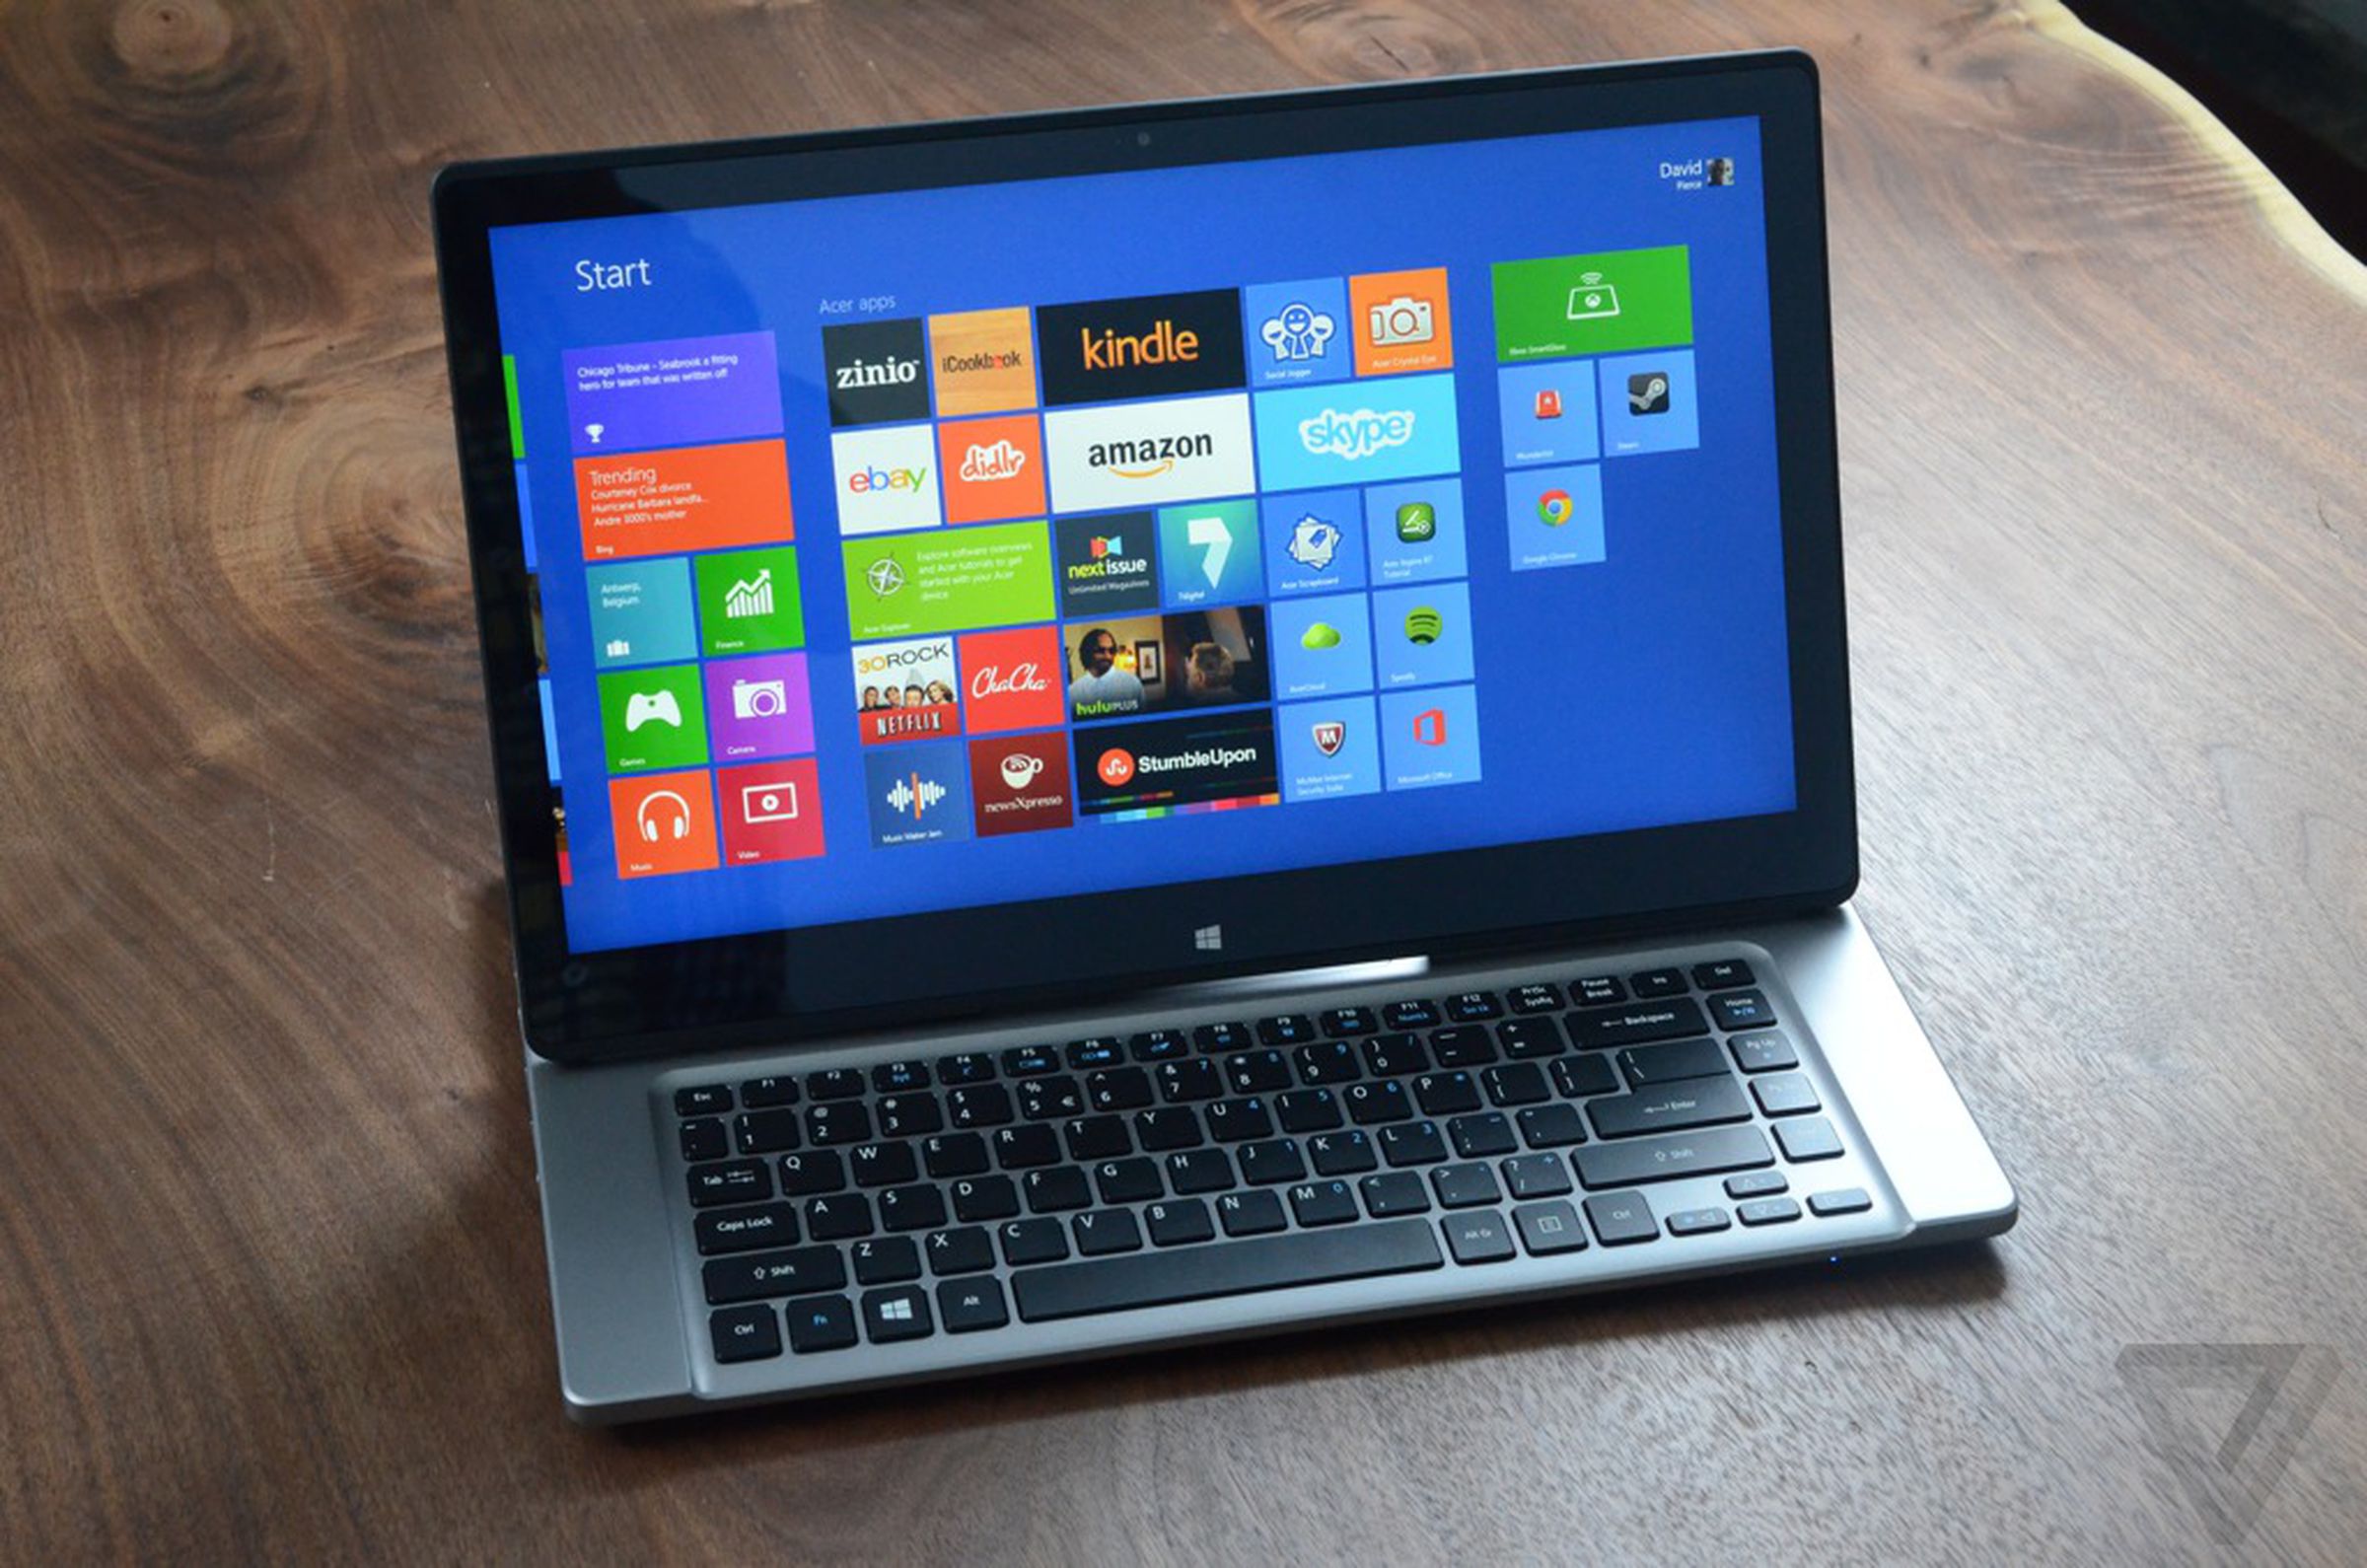 Acer Aspire R7 pictures